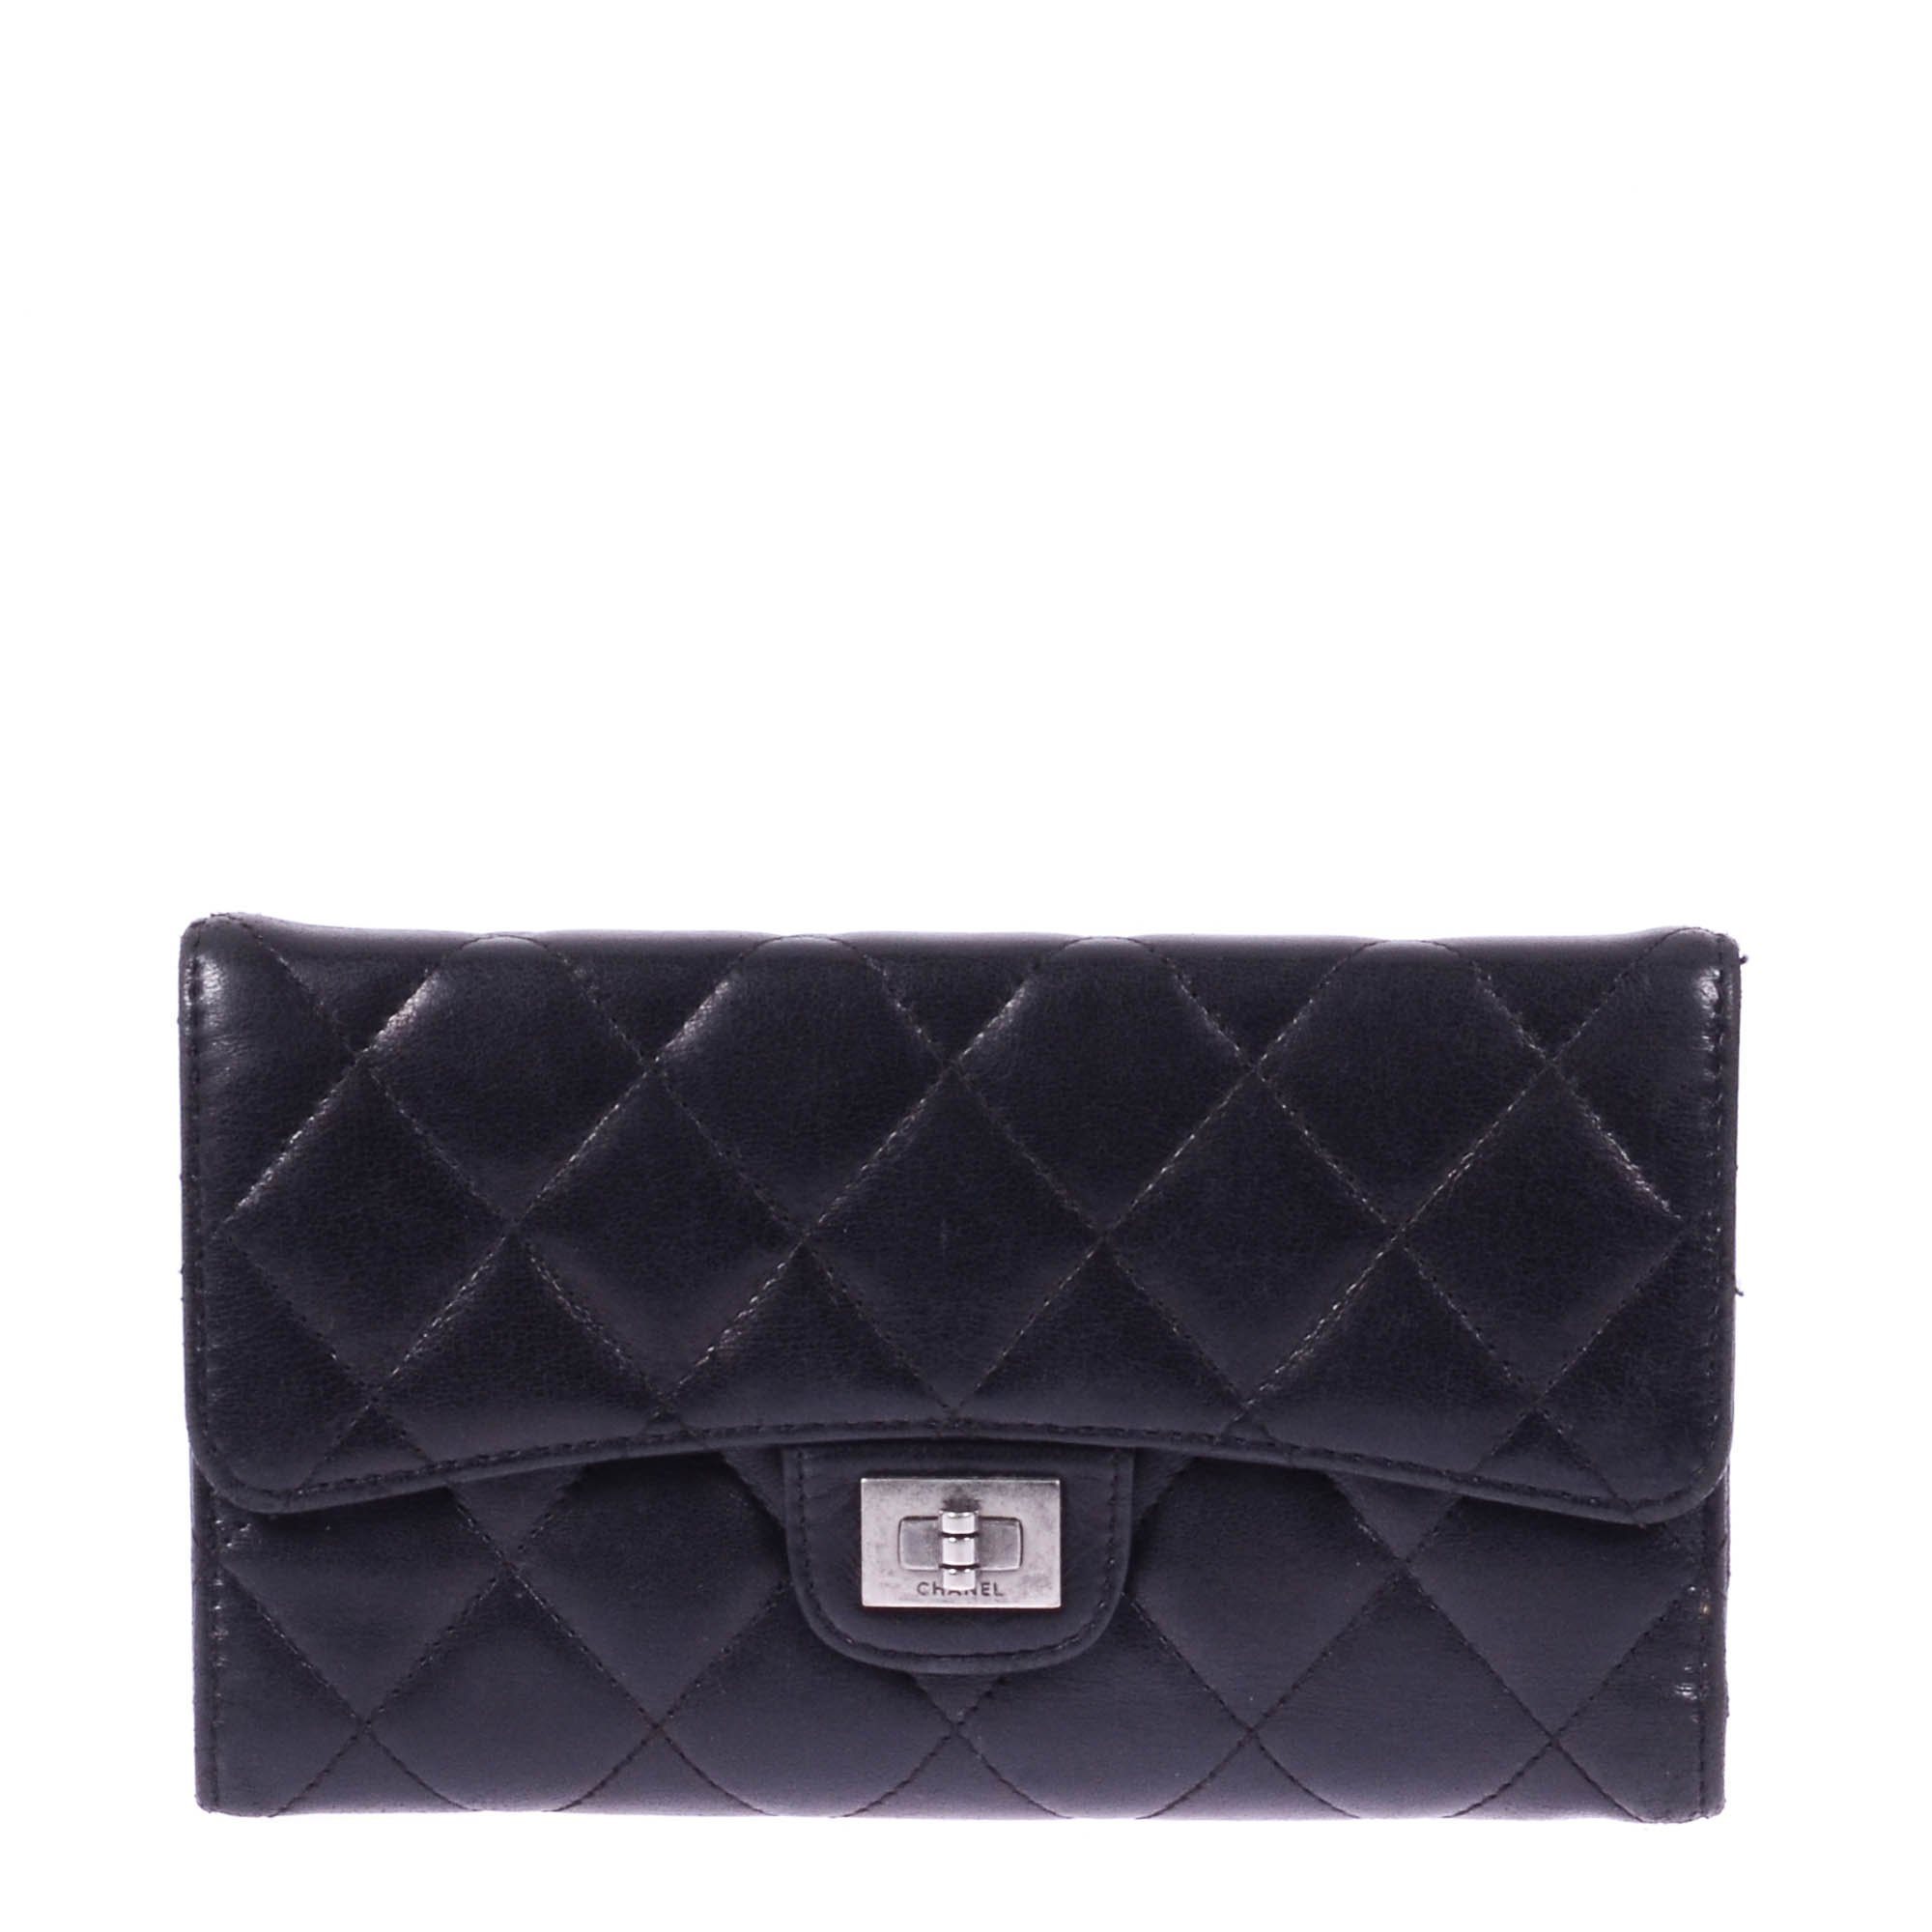 Chanel Black Quilted Leather Reissue Trifold Wallet